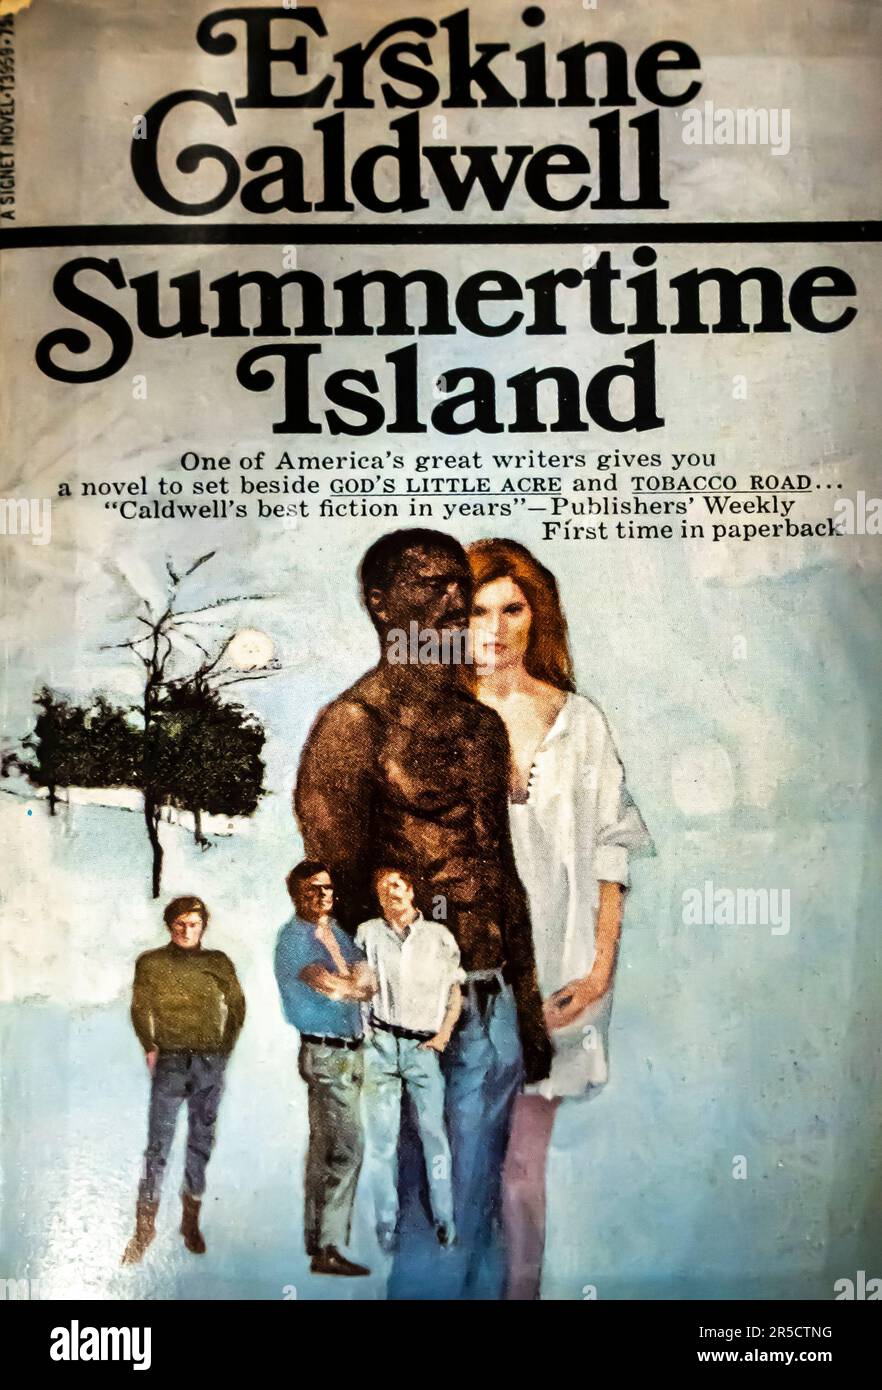 Summertime Island Book by Erskine Caldwell 1968 Banque D'Images